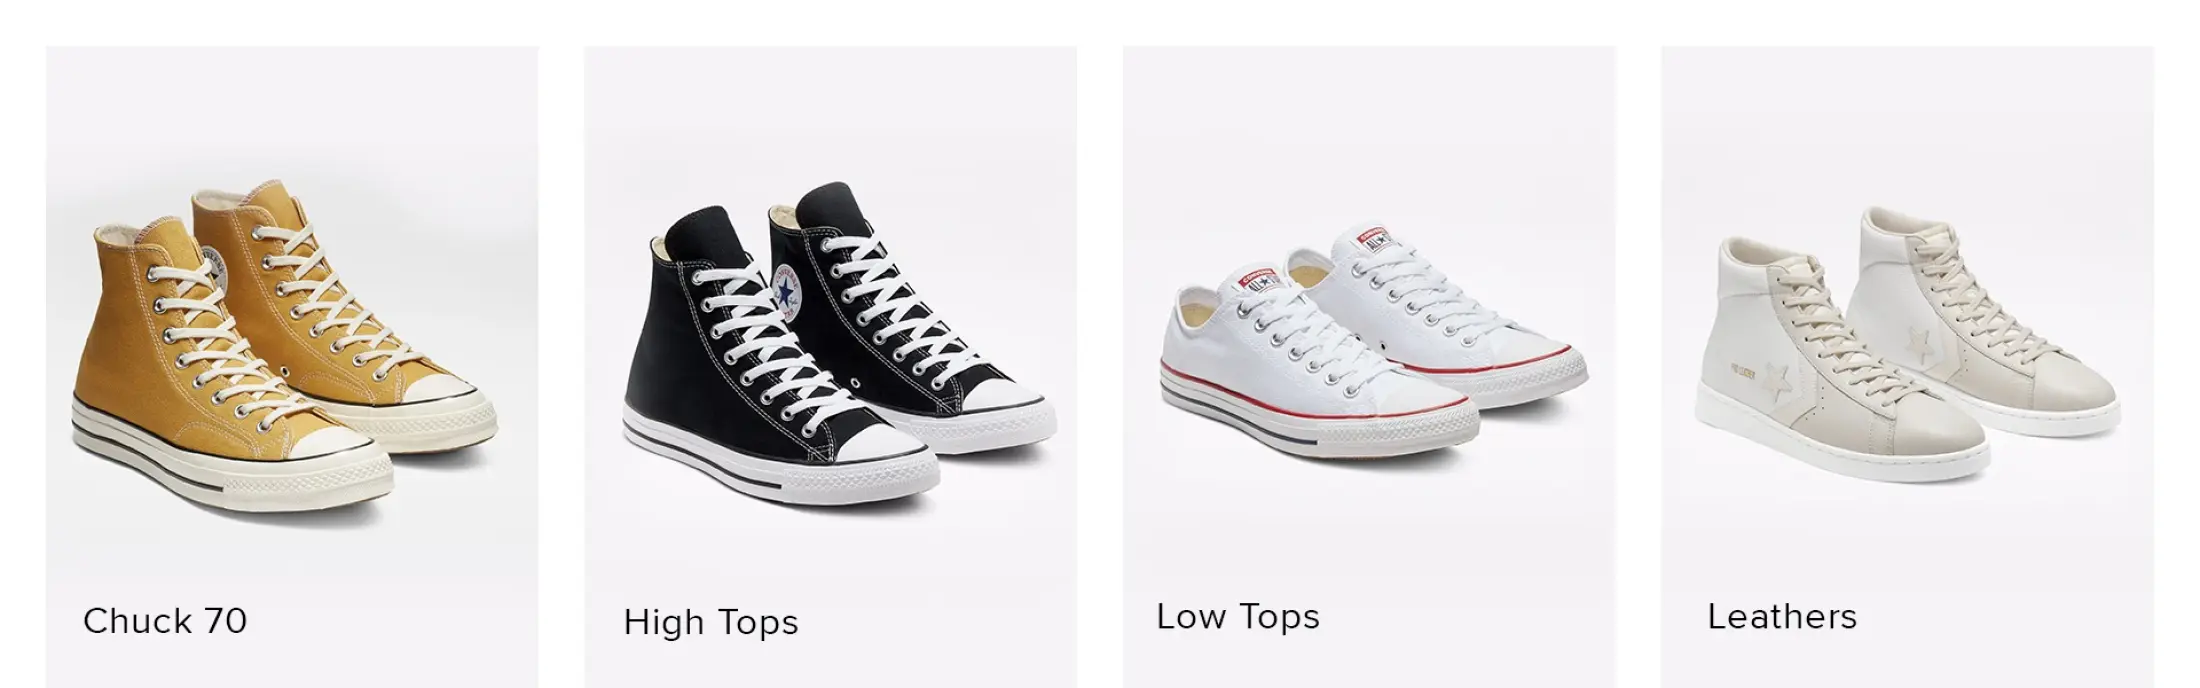 lazada converse official store